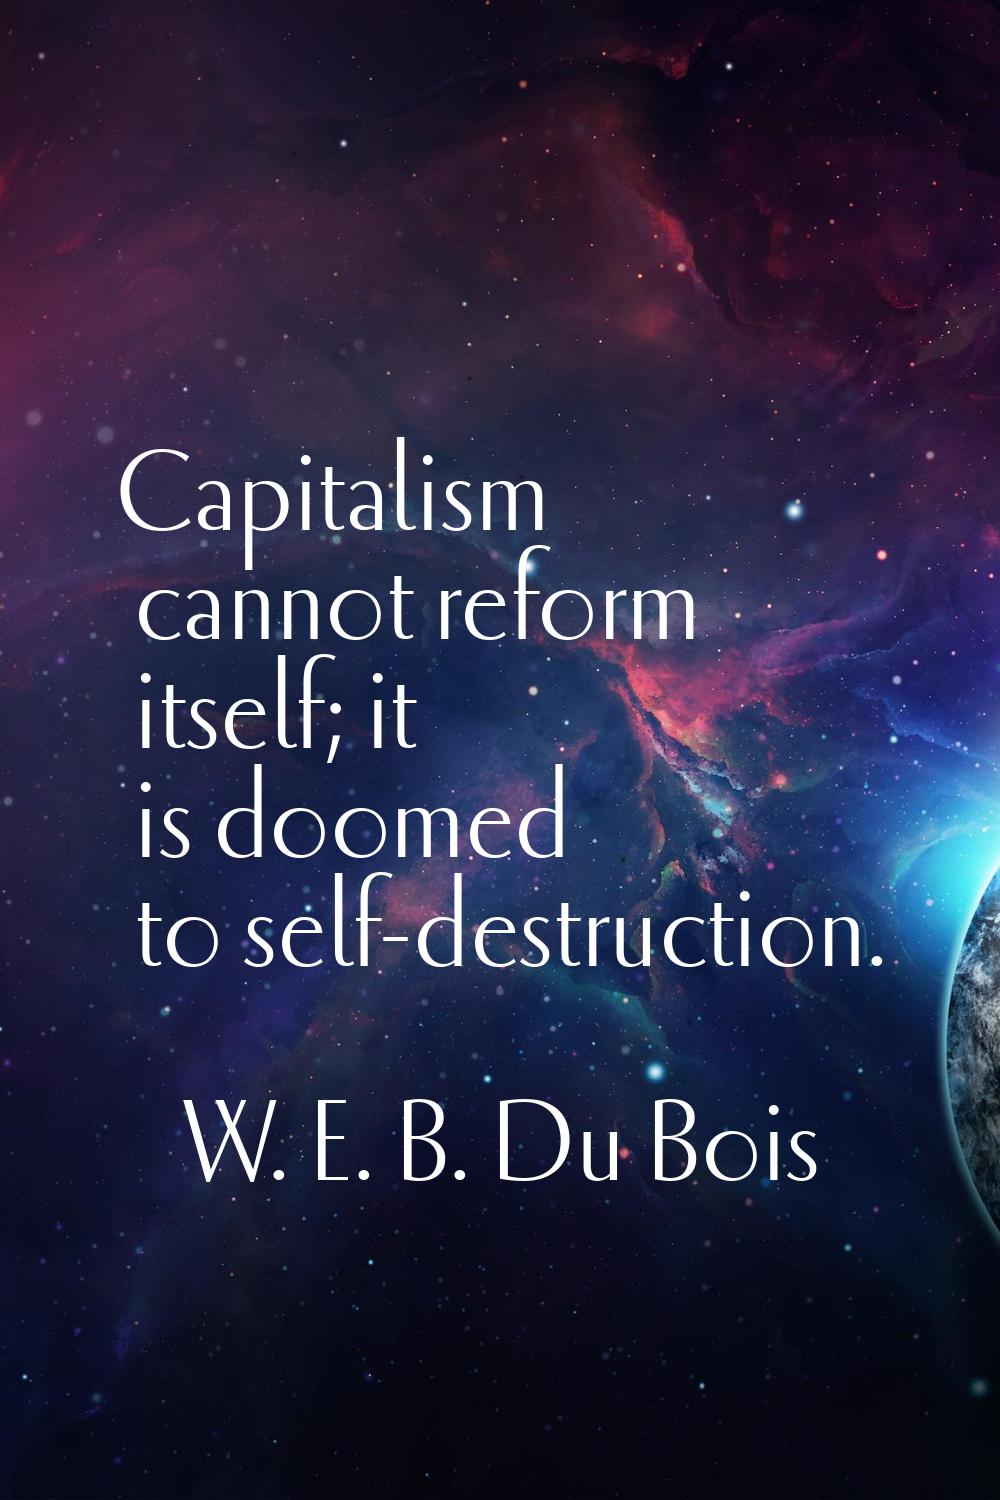 Capitalism cannot reform itself; it is doomed to self-destruction.